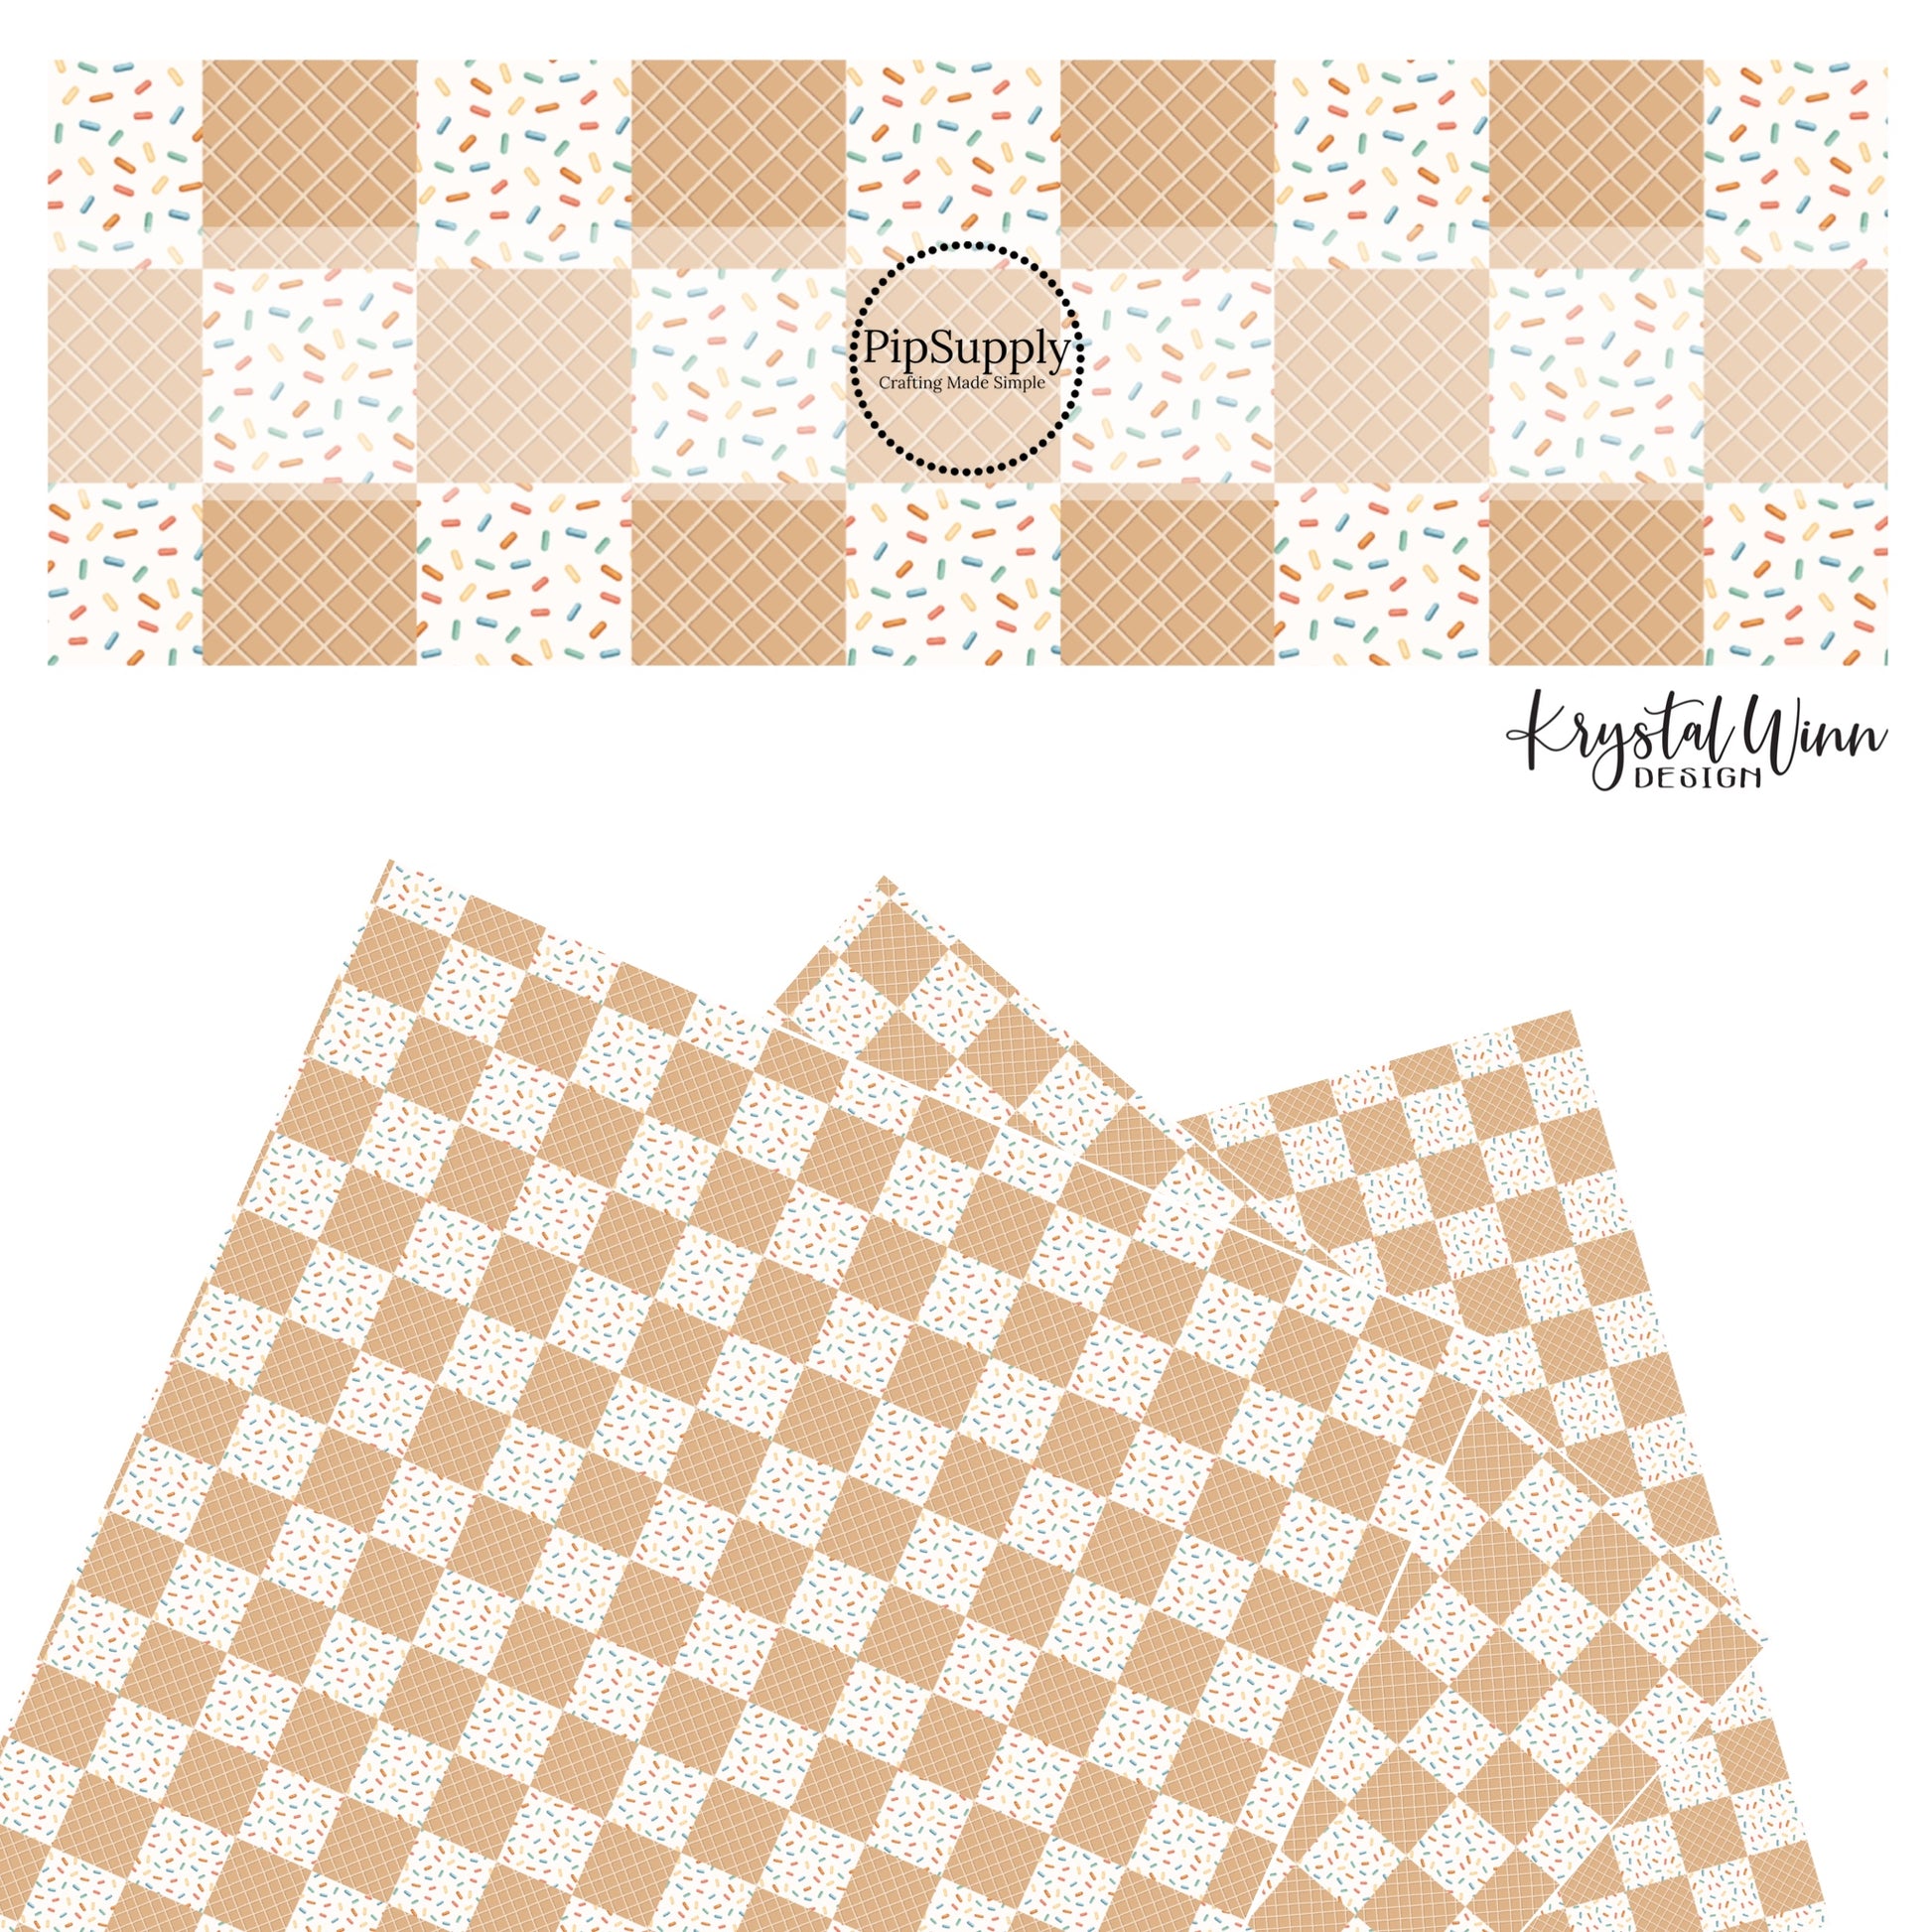 These dessert checkered themed faux leather sheets contain the following design elements: checkered pattern that features cream with colorful sprinkles and light brown ice cream cone pattern. Our CPSIA compliant faux leather sheets or rolls can be used for all types of crafting projects.